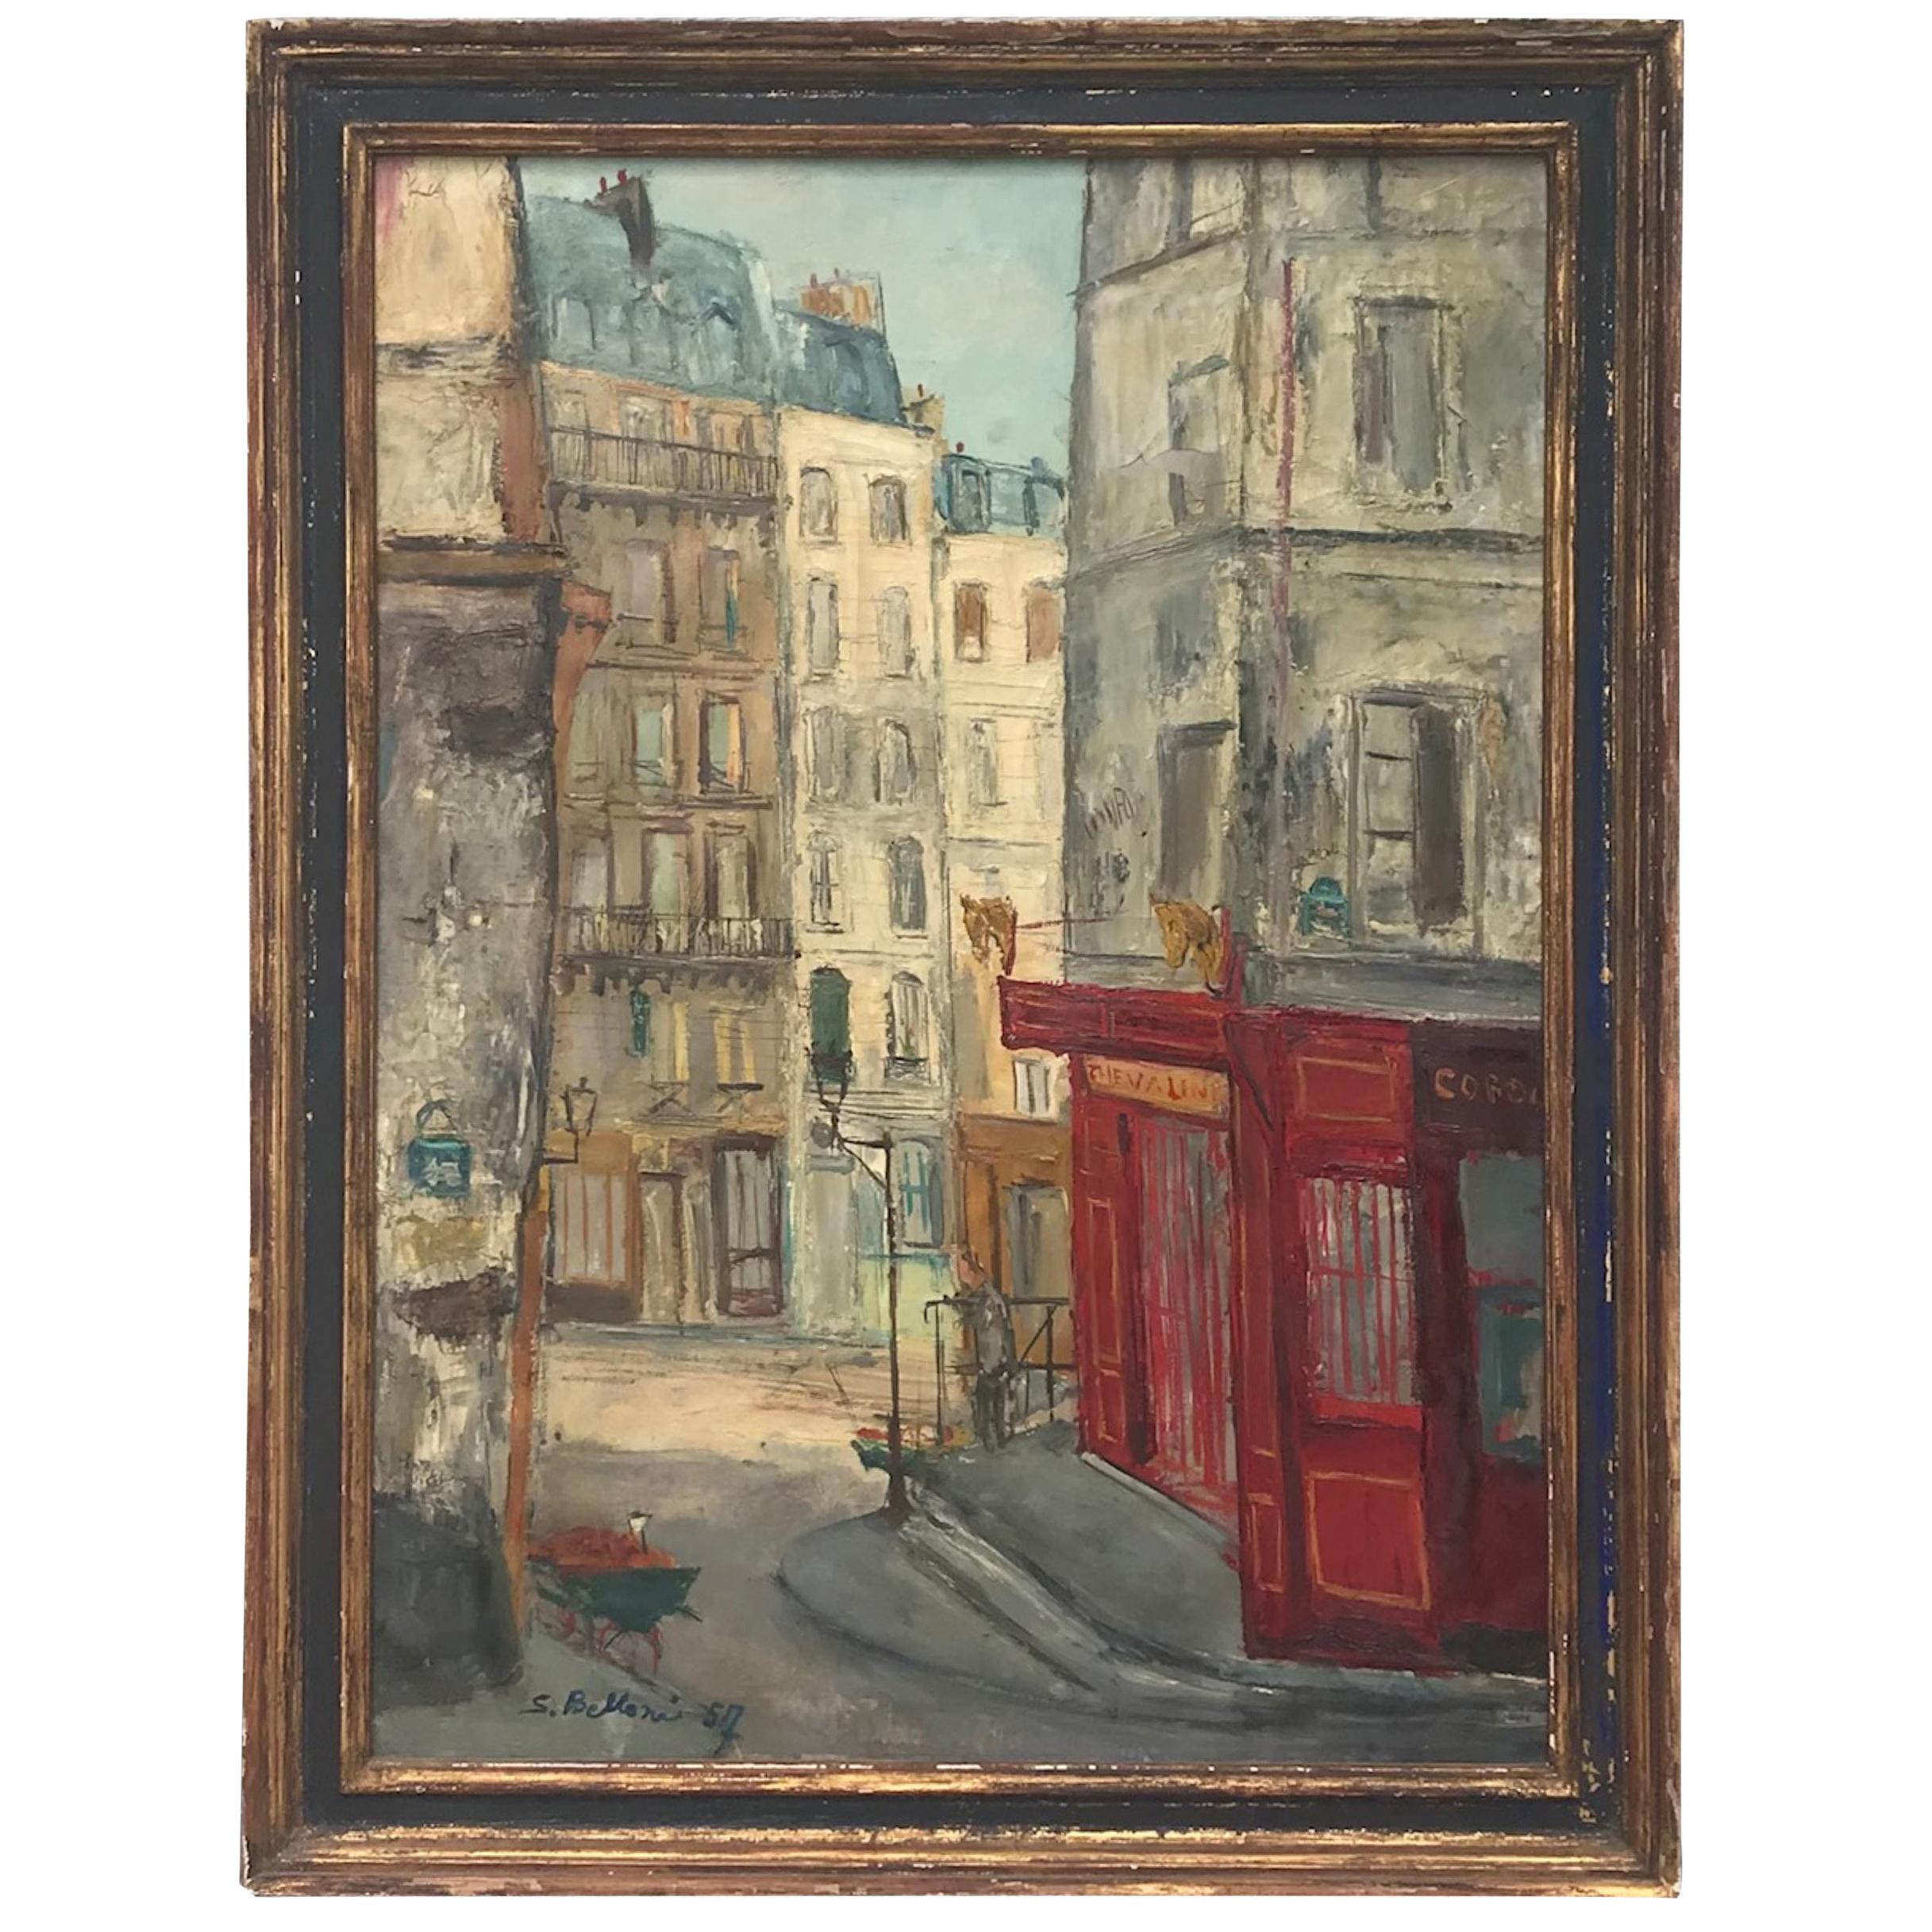 Parisian Cityscape, Signed and Framed Oil on Canvas by Serge Belloni